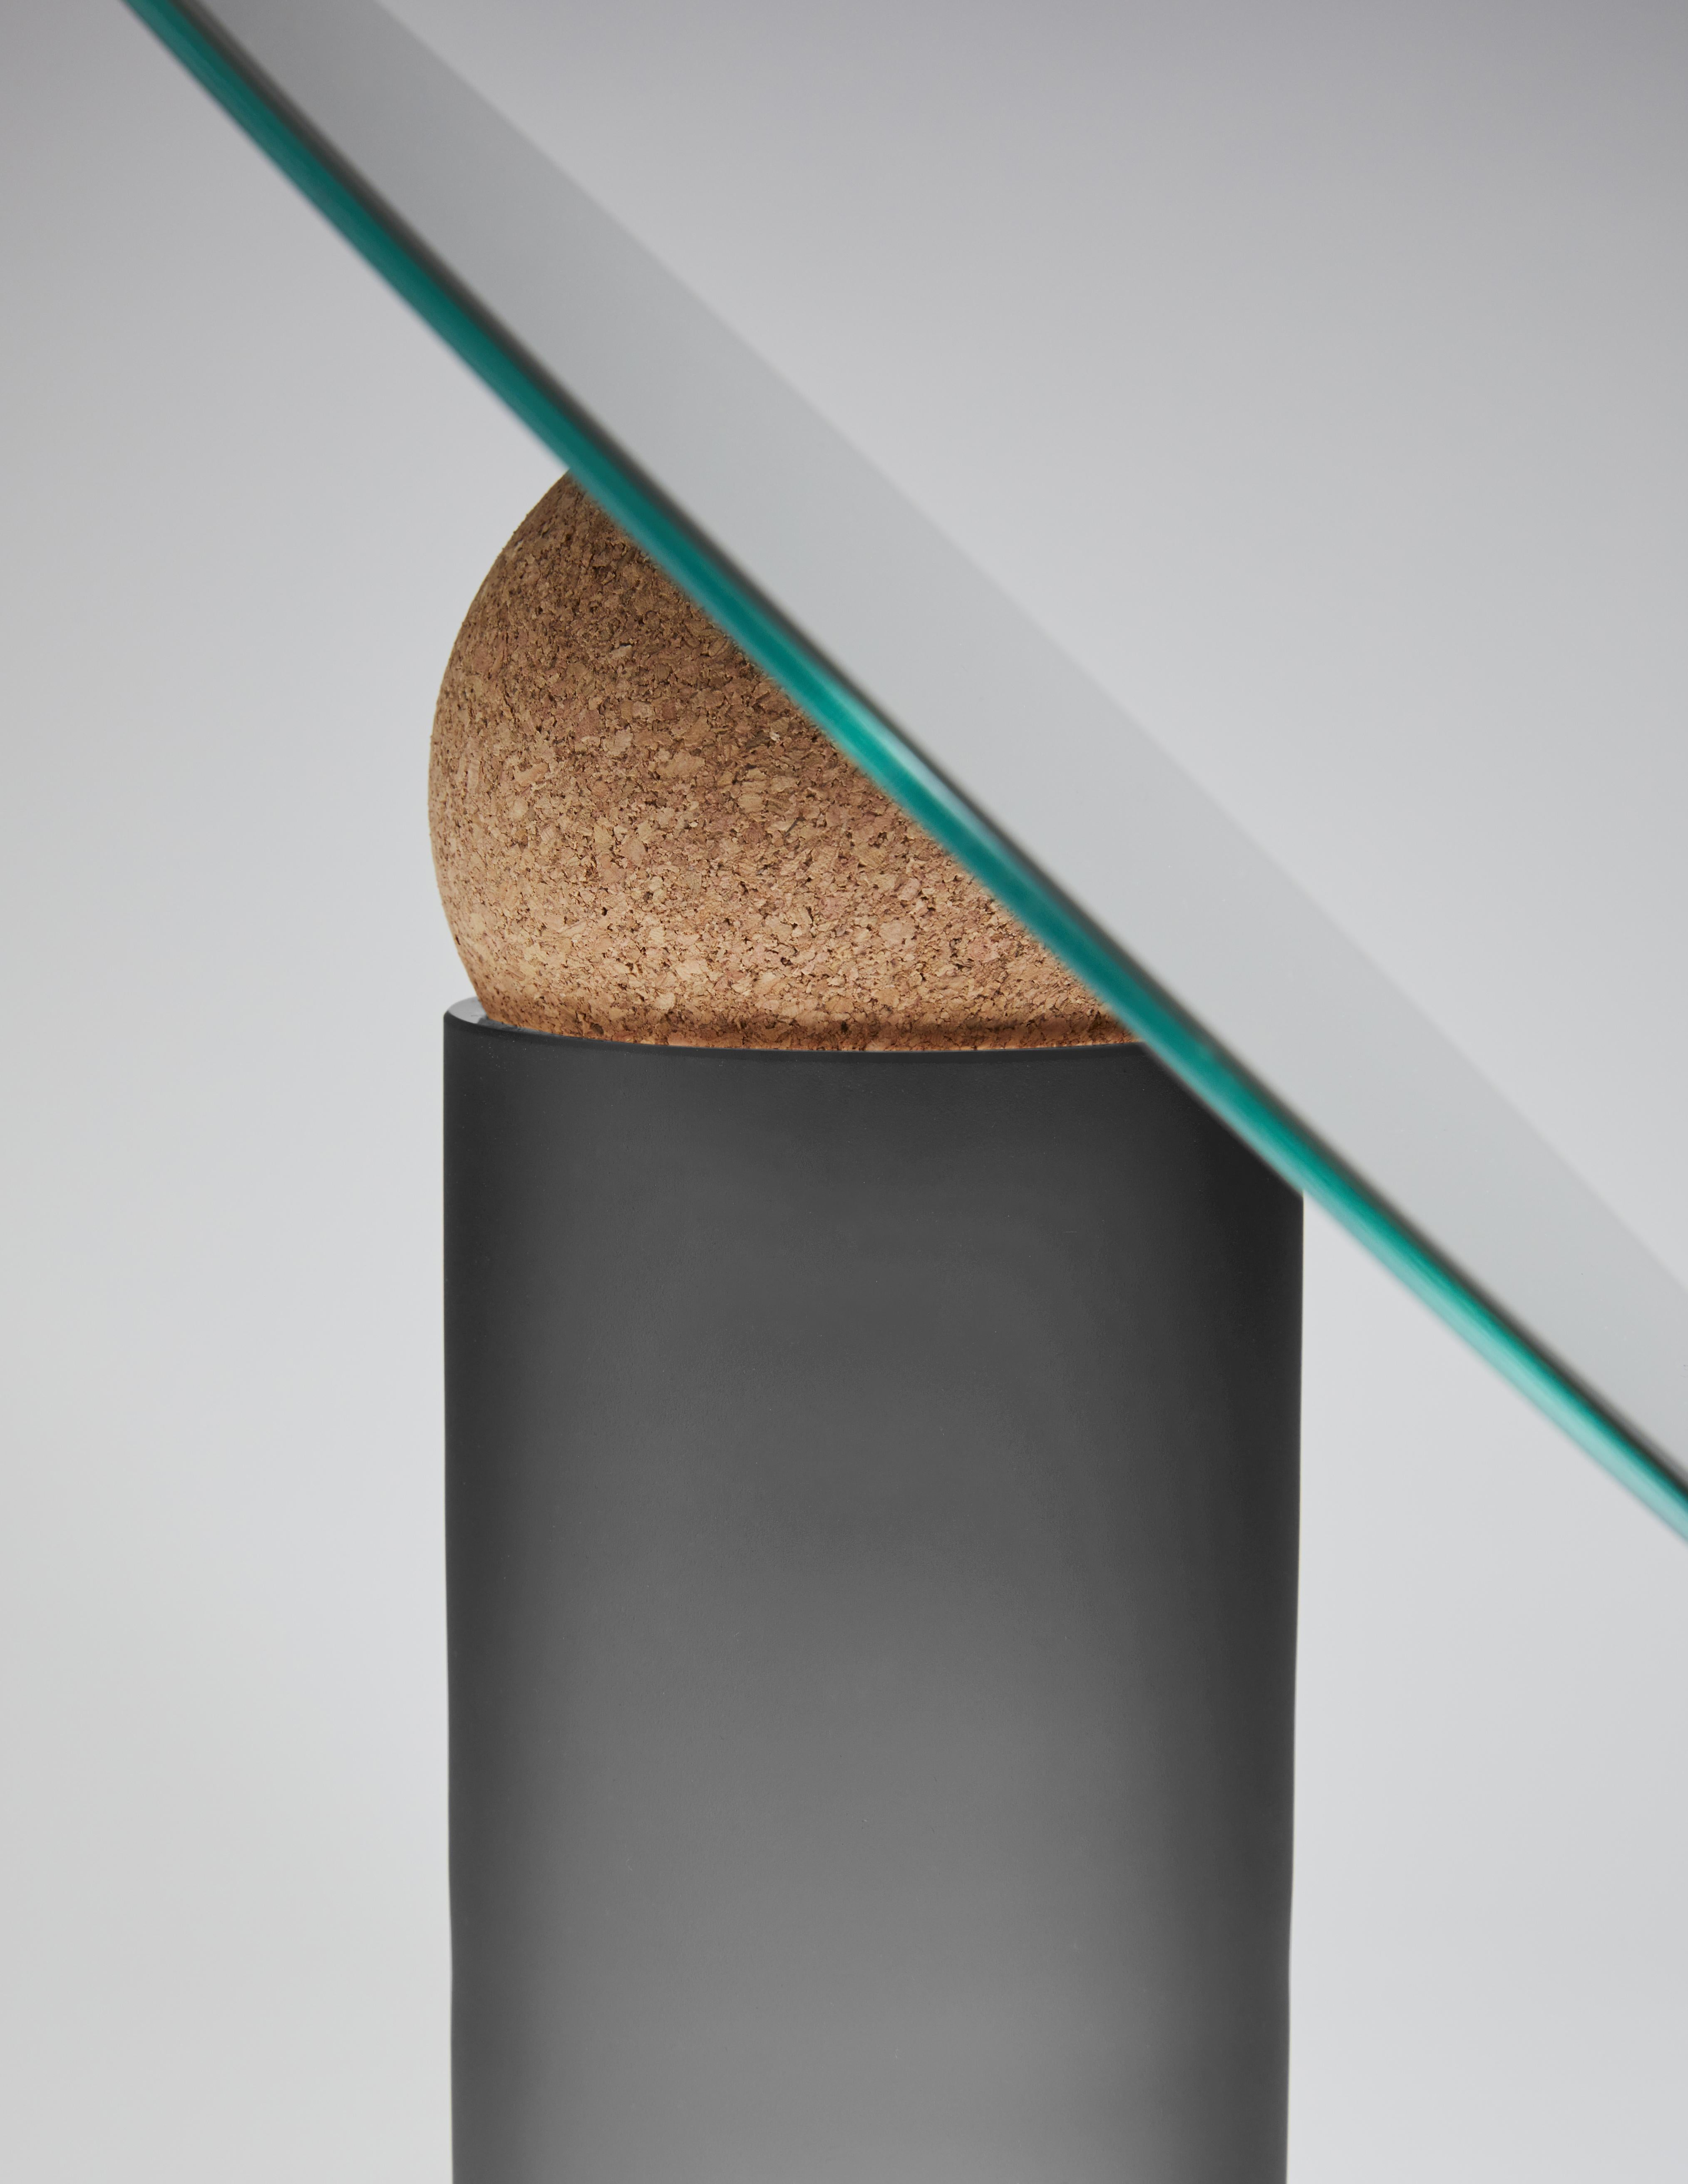 Astra table mirror-30 by Clemence Birot
Dimensions: Mirror Ø 30 x 33 cm
Materials: mirror, glass, cork. 

Clemence Birot started her career in Copenhagen, Denmark, and discovered a design practice closely related to craftsmanship. The latter